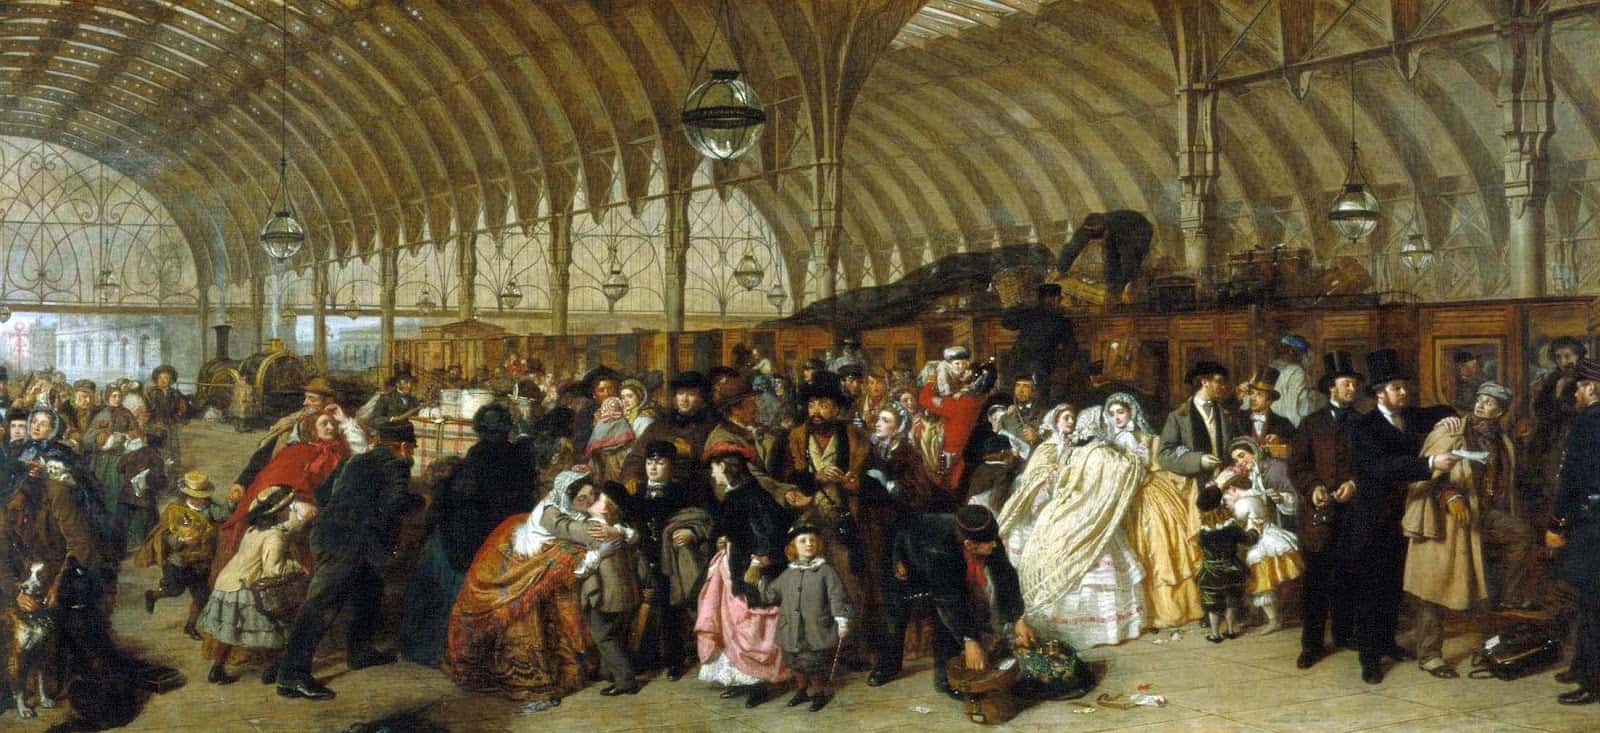 William Powell Frith - The Railway Station